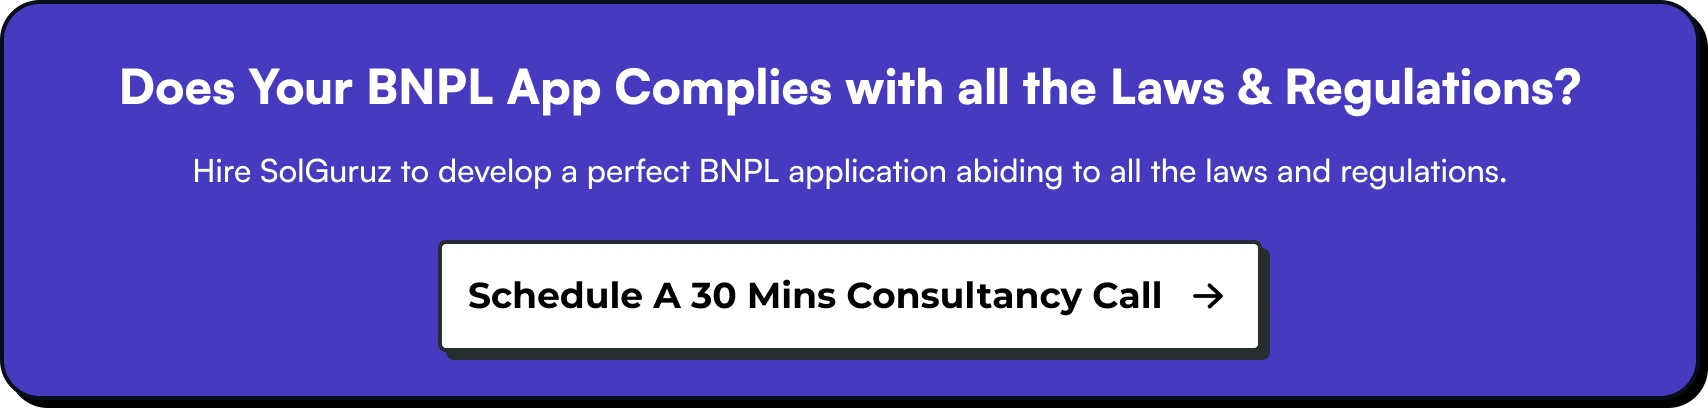 Does Your BNPL App comply with all the Laws and regulations? Hire SolGuruz to develop a perfect BNPL application abiding to all the laws and regulations. Inquire Now!